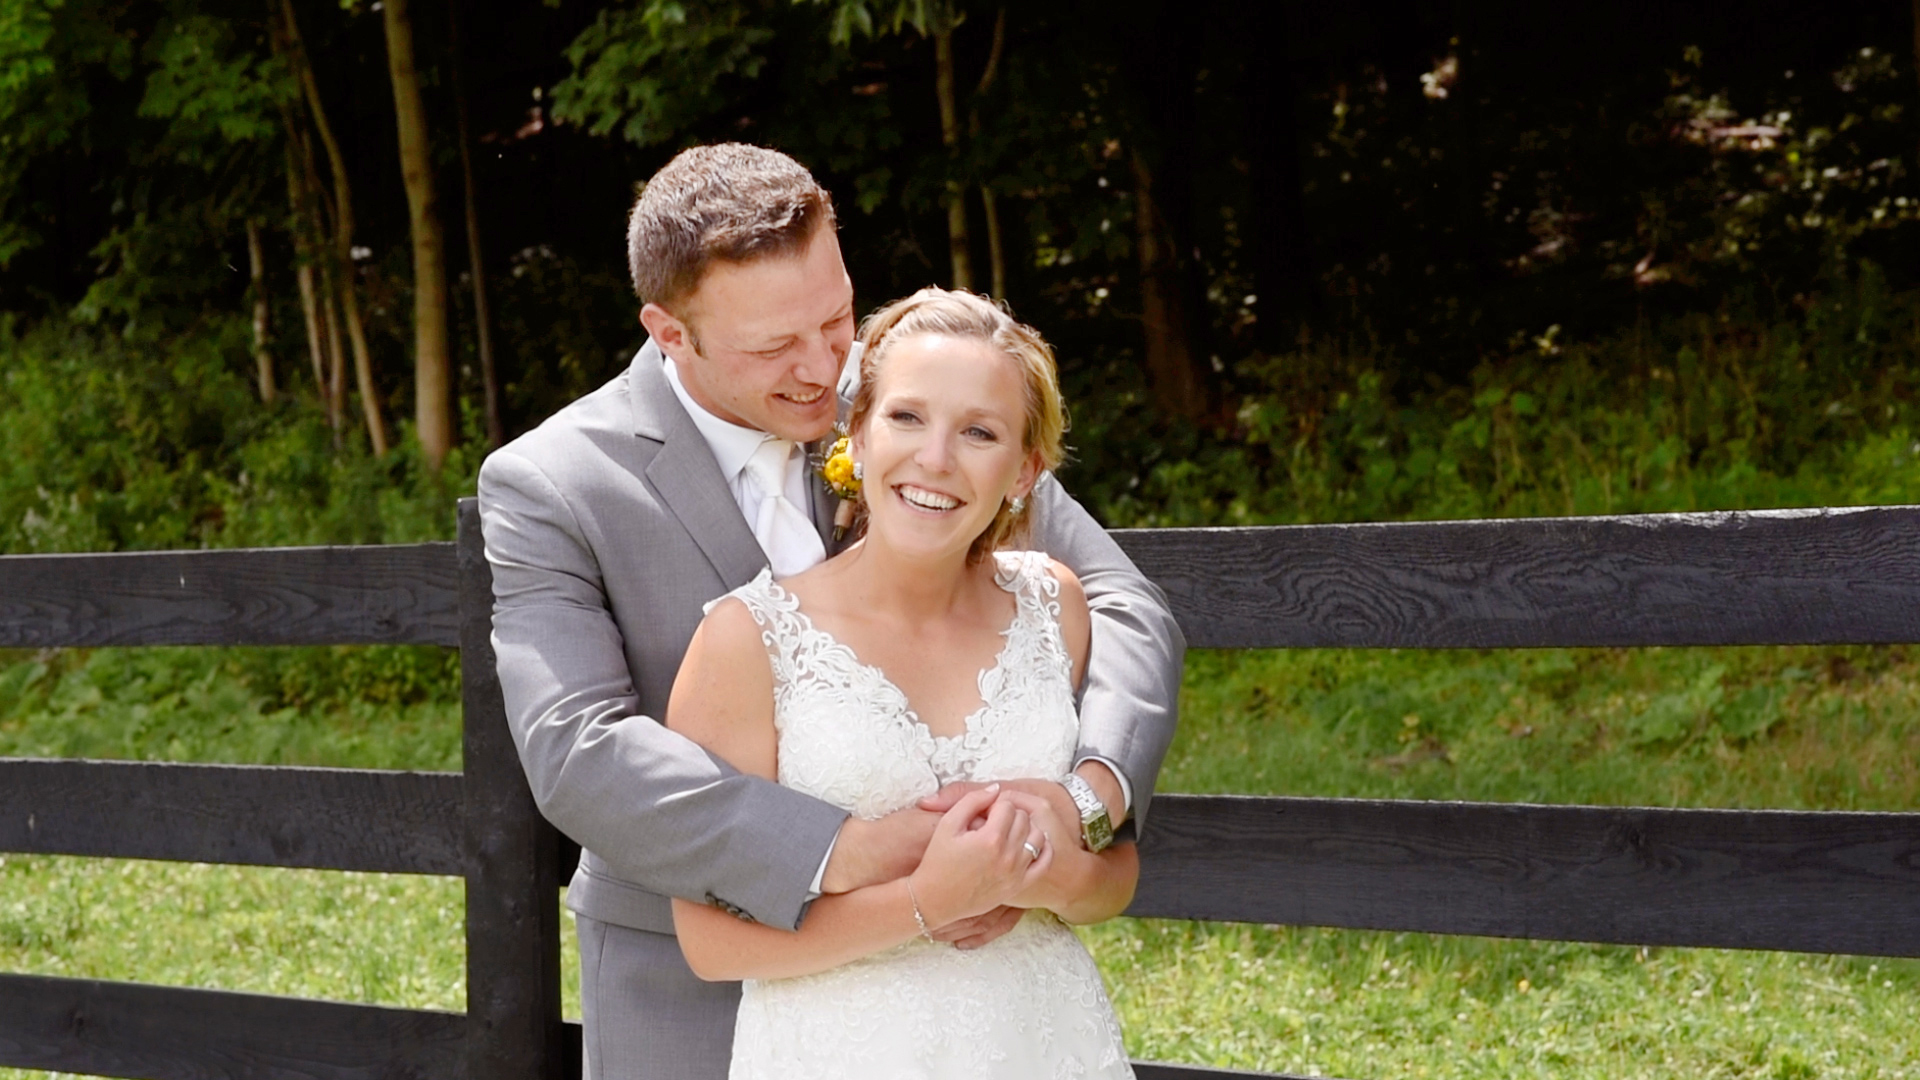 summer wedding at fortune valley manor in saugerties ny